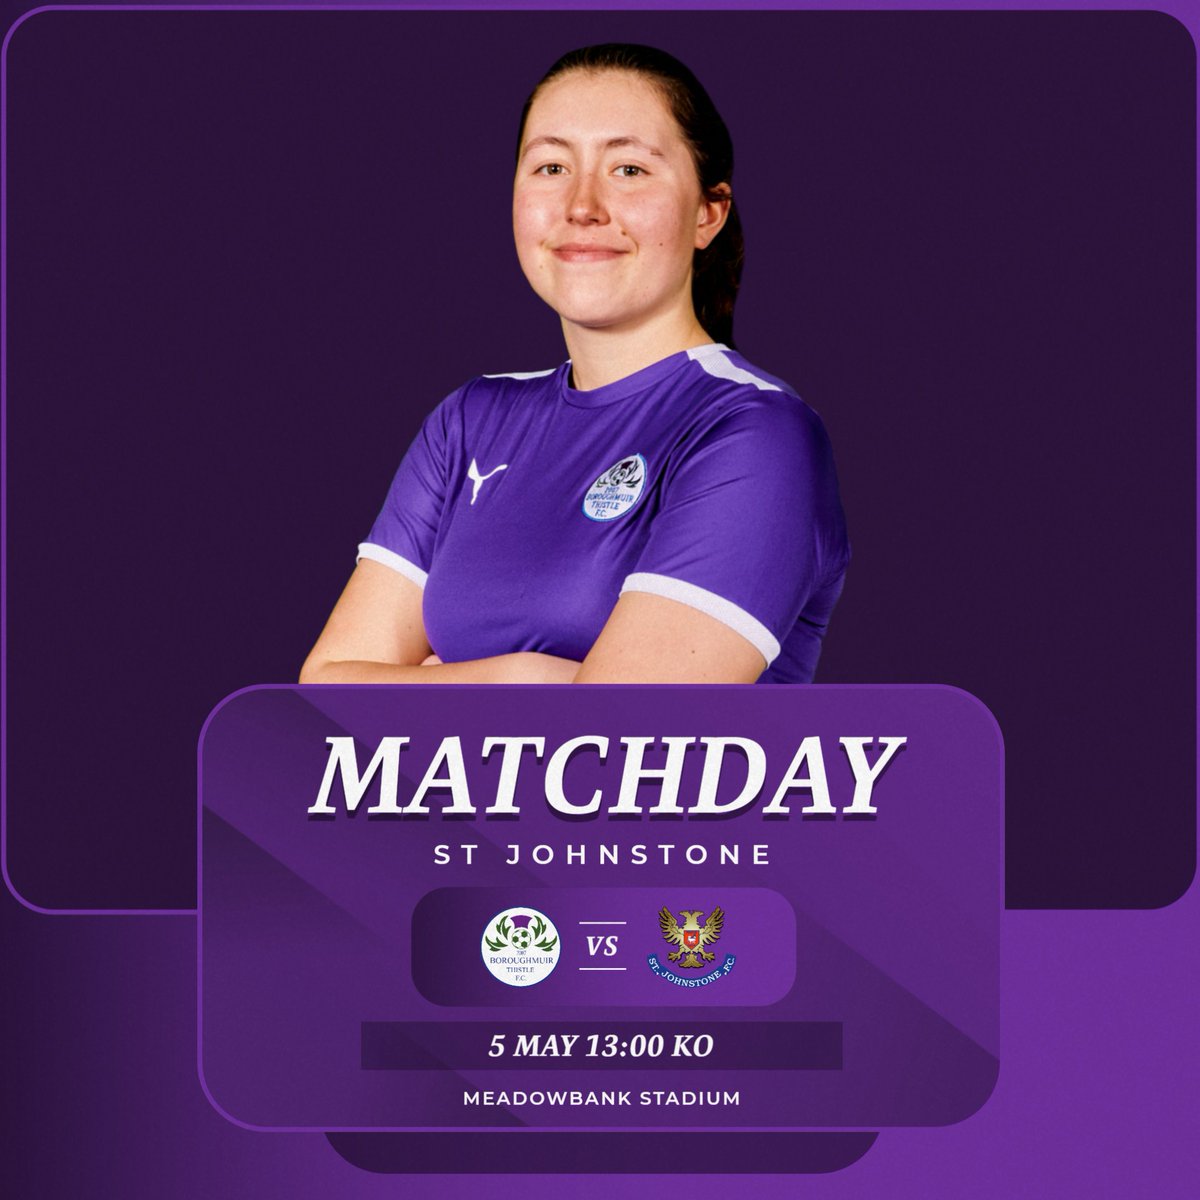 𝗠𝗔𝗧𝗖𝗛𝗗𝗔𝗬 📣 We're back in action this afternoon! Here's a reminder of all the key info... 🆚 @stjwfc 🏆 @SWPL 2 🏟️ Meadowbank Stadium 🕐 1pm KO 🎟️ £6/2 ➡️ Follow all the in-game action via @ThistleLive.